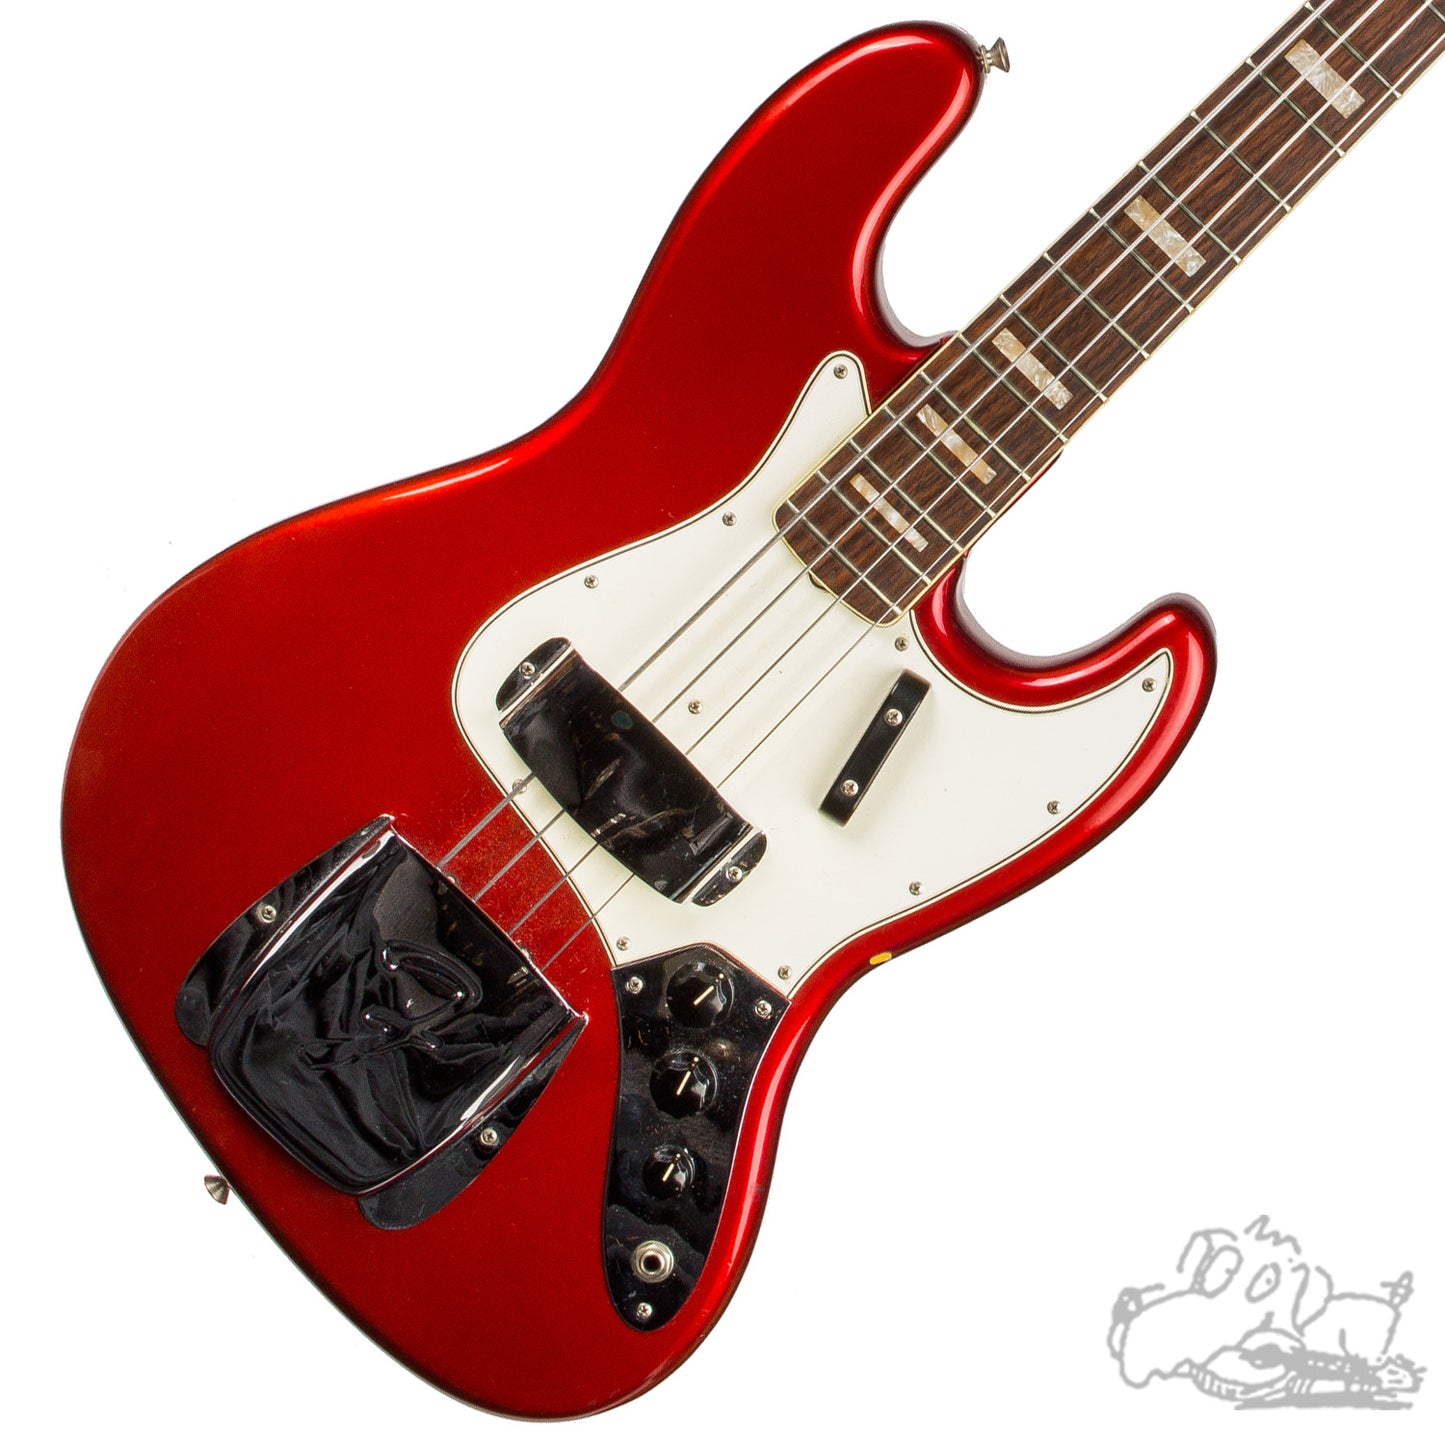 1966 Fender Jazz Bass in Candy Apple Red